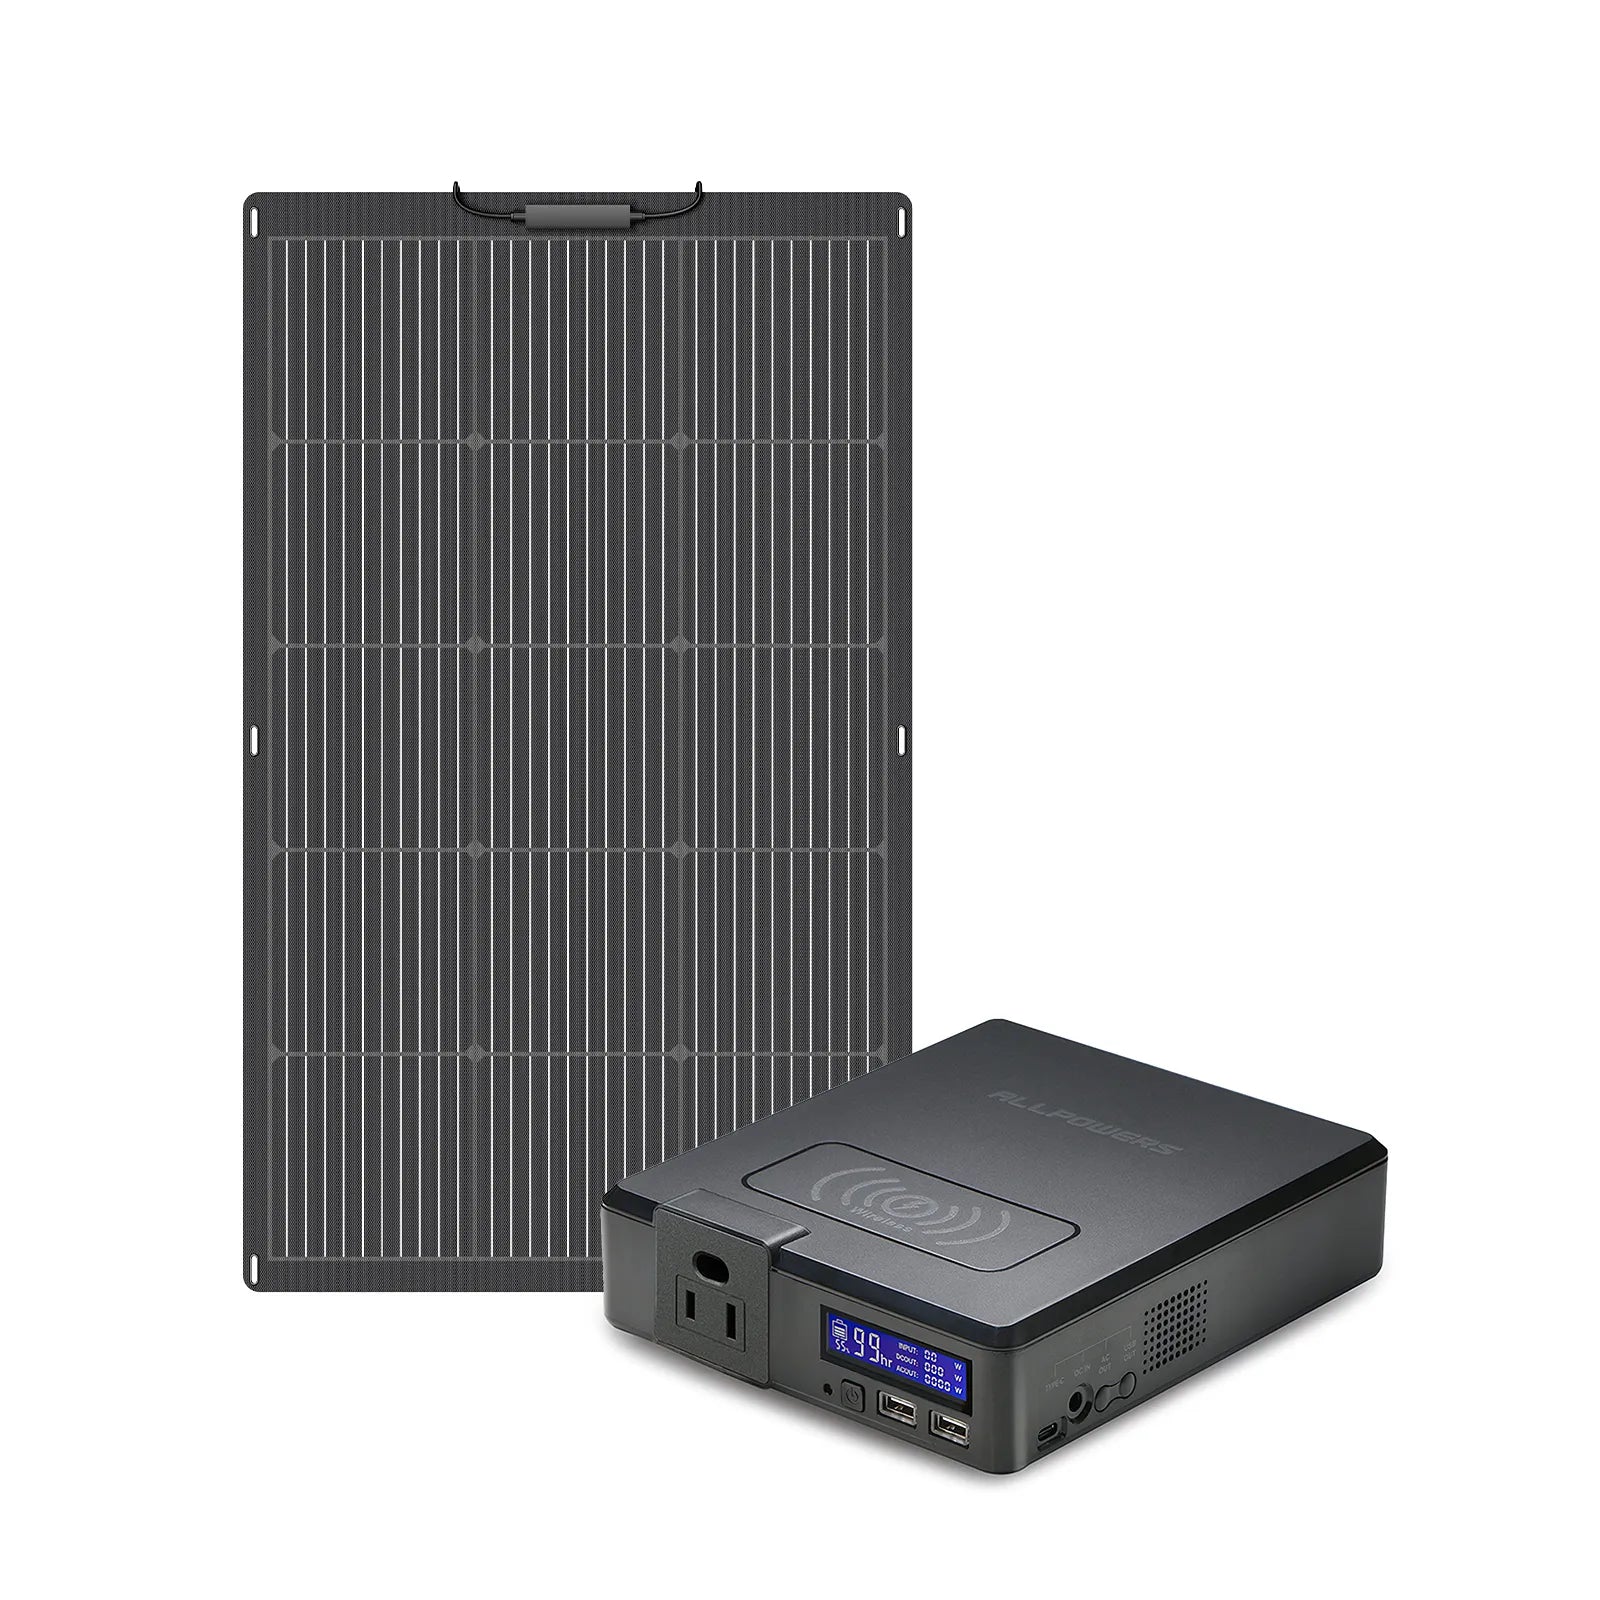 ALLPOWERS S200 Portable Power Bank 200W 154Wh (S200 + SF100 Flexible 100W Solar Panel)